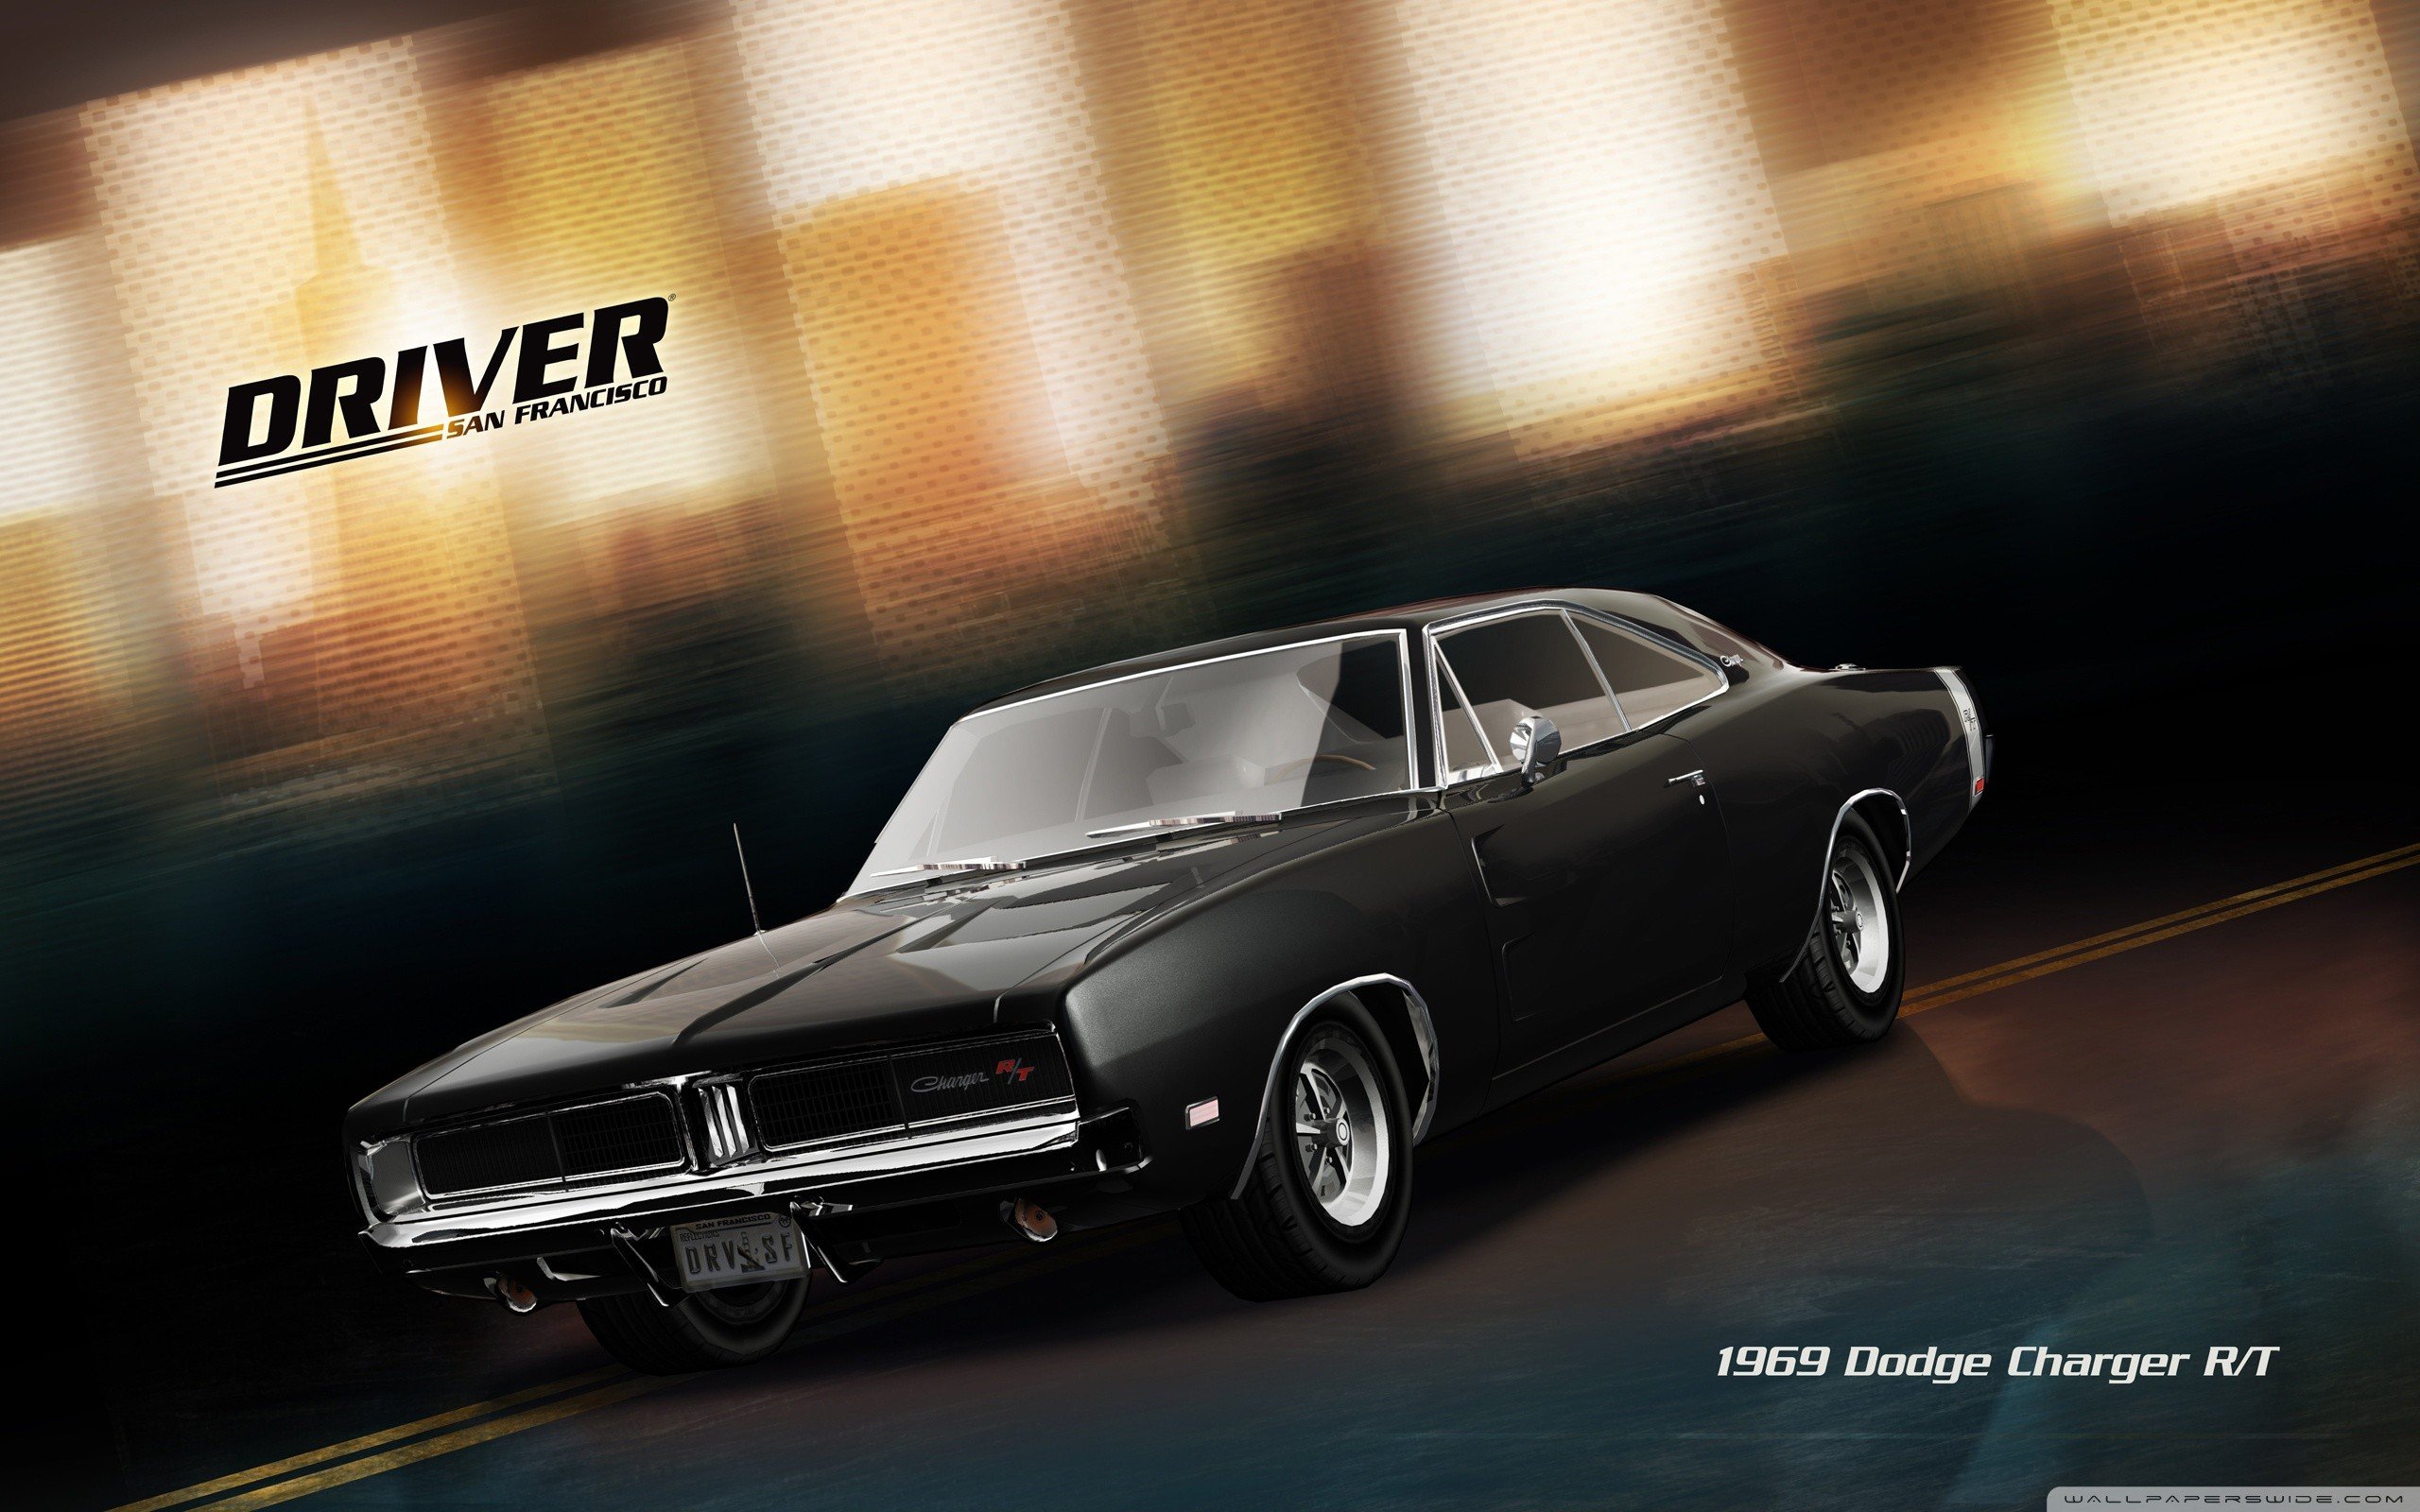 video, Games, San, Francisco, Dodge, Charger, Driver, Dodge, Charger, Rt Wallpaper